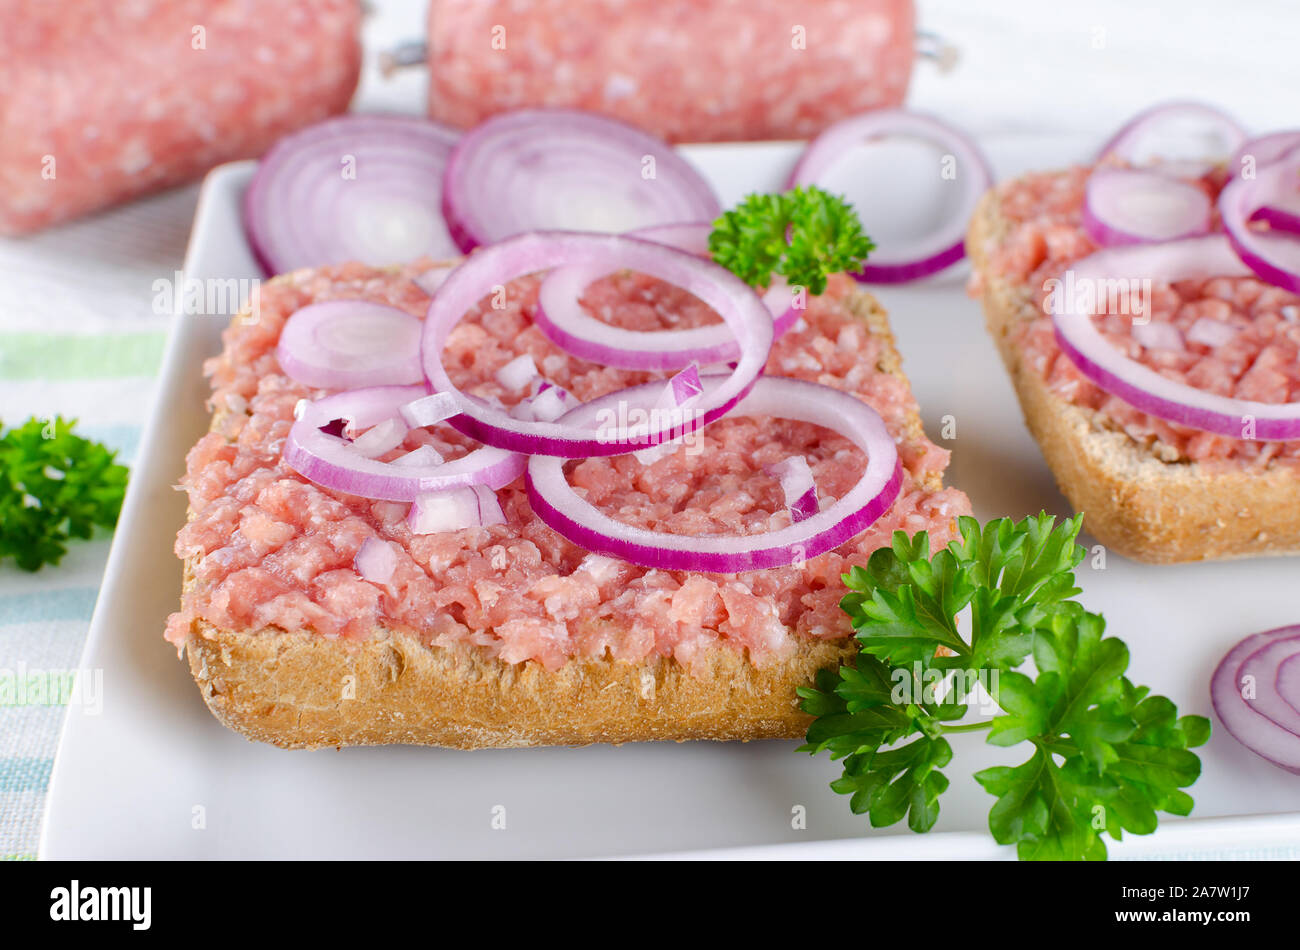 german food mett ground pork, bun and raw meat with onion and ...